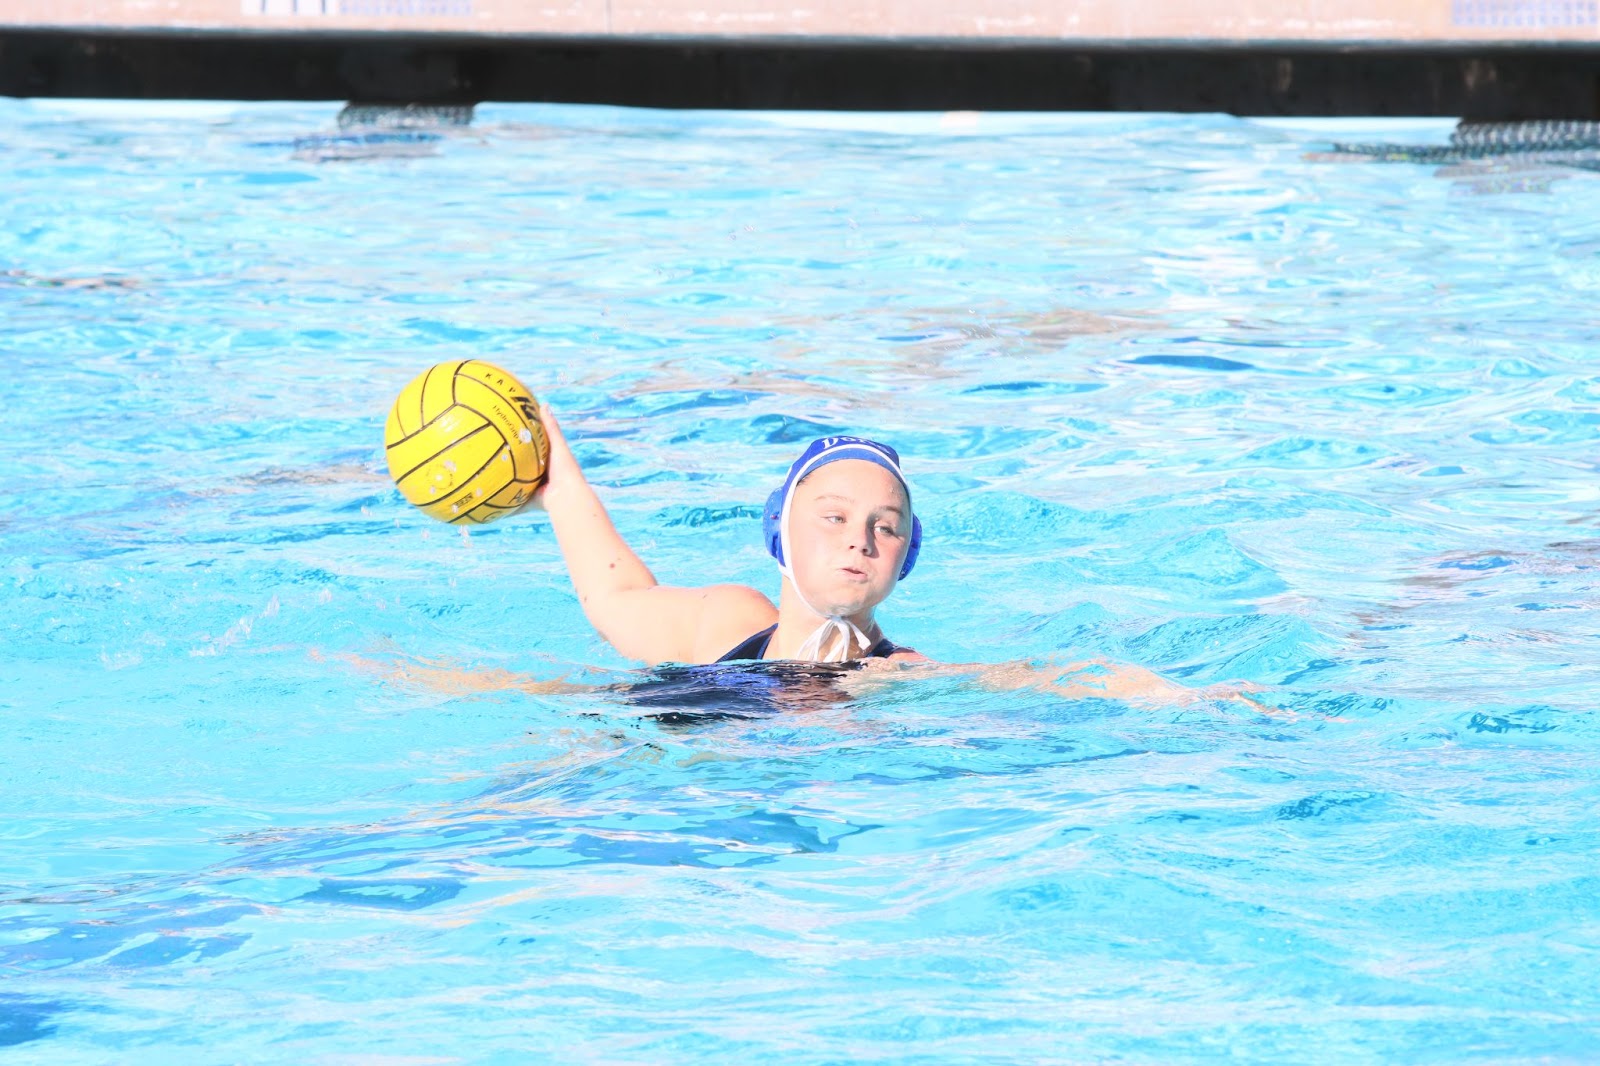 Giants and Pirates are no match for Girls Water Polo!